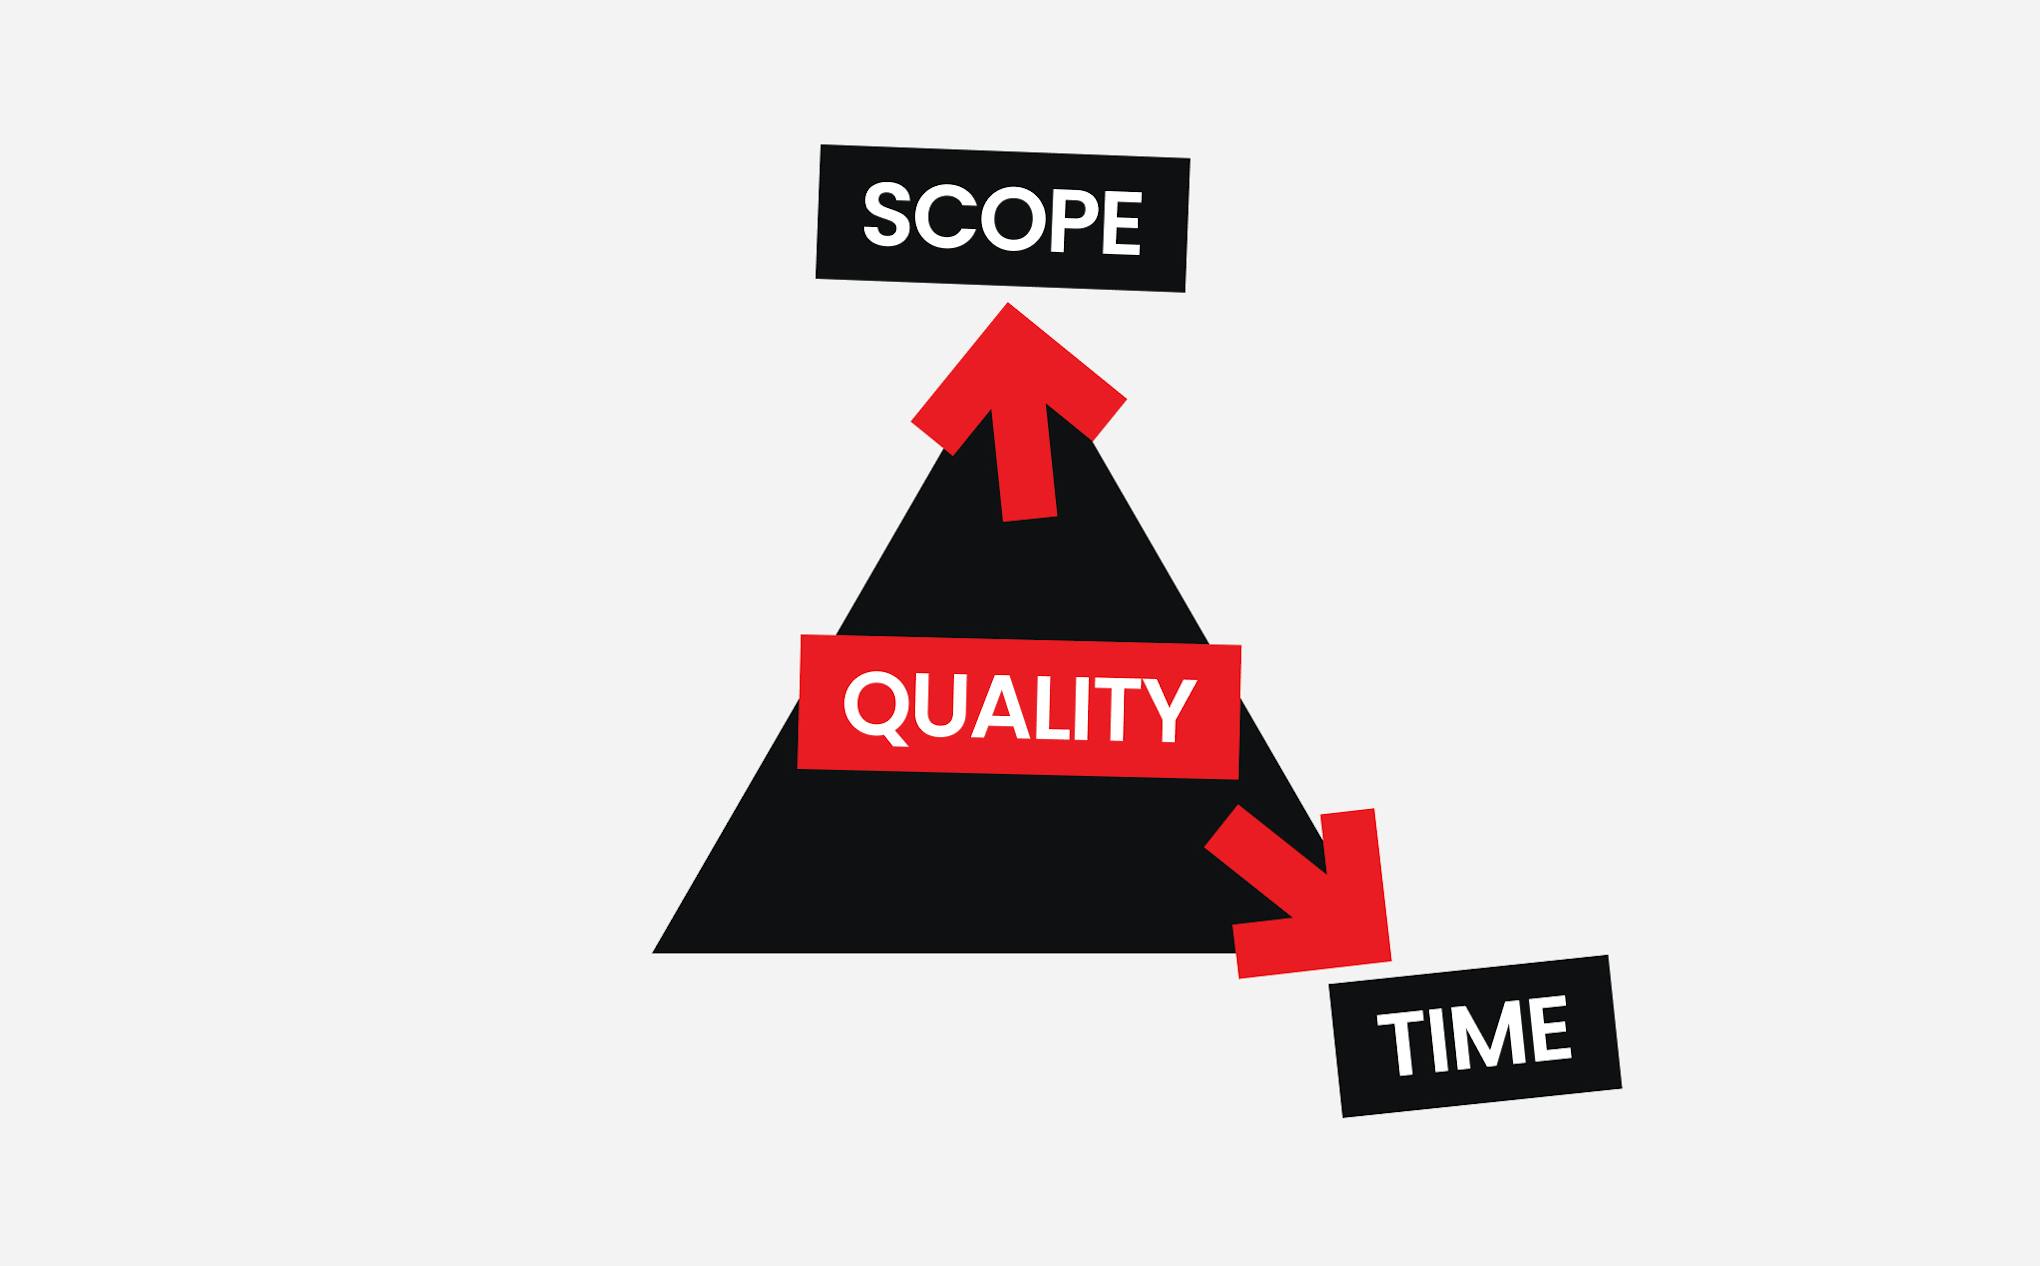 The Quality of Software Development: Scope and Time.